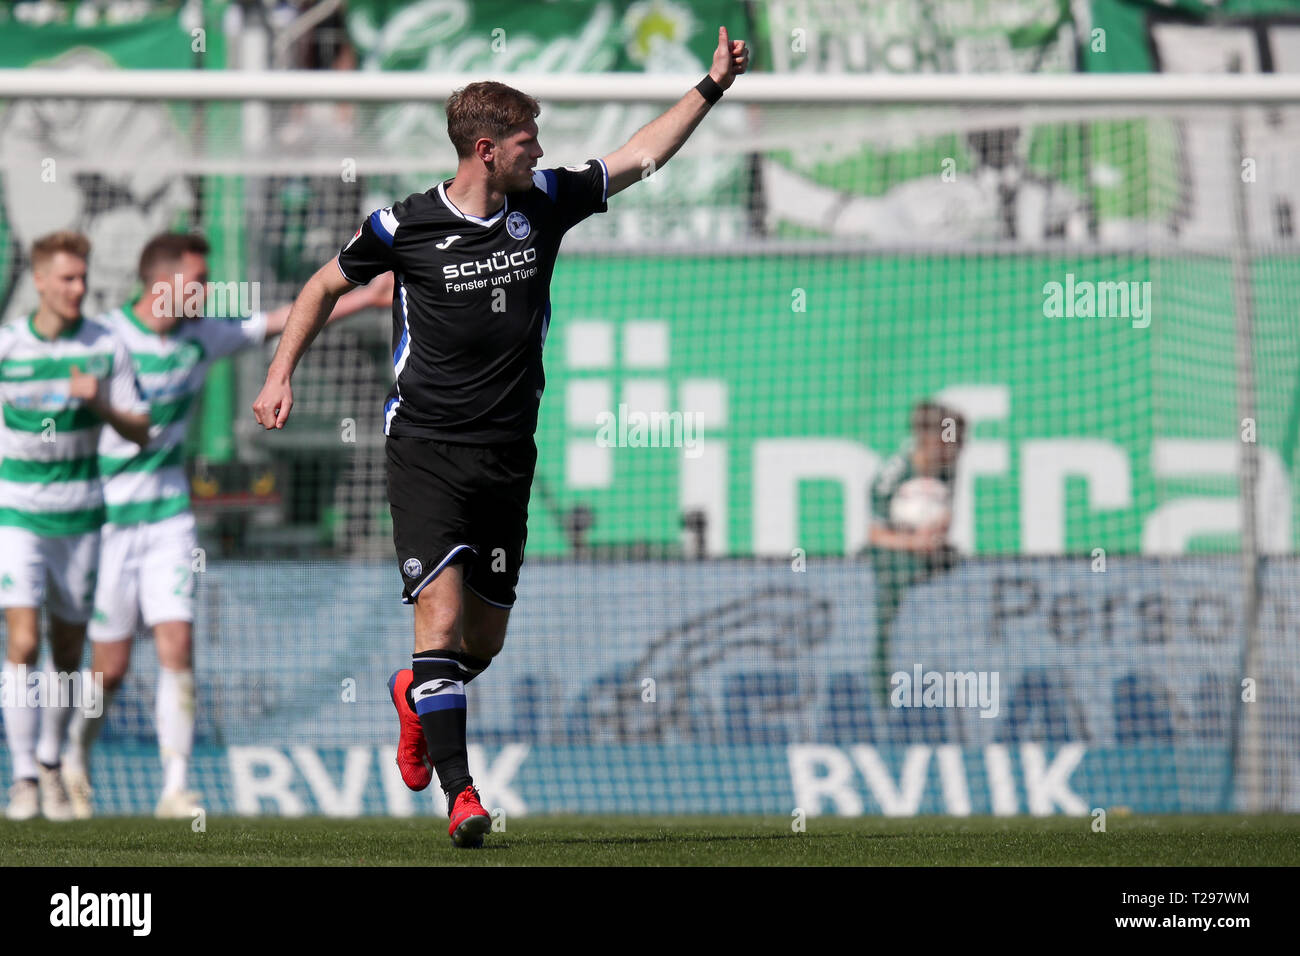 Furth, Germany. 31st Mar, 2019. Soccer: 2nd Bundesliga, SpVgg Greuther Fürth - Arminia Bielefeld, 27th matchday, at the Sportpark Ronhof Thomas Sommer. Fabian Klos from Bielefeld cheers on his goal to 2:1. Photo: Daniel Karmann/dpa - IMPORTANT NOTE: In accordance with the requirements of the DFL Deutsche Fußball Liga or the DFB Deutscher Fußball-Bund, it is prohibited to use or have used photographs taken in the stadium and/or the match in the form of sequence images and/or video-like photo sequences. Credit: dpa picture alliance/Alamy Live News Credit: dpa picture alliance/Alamy Live News Stock Photo